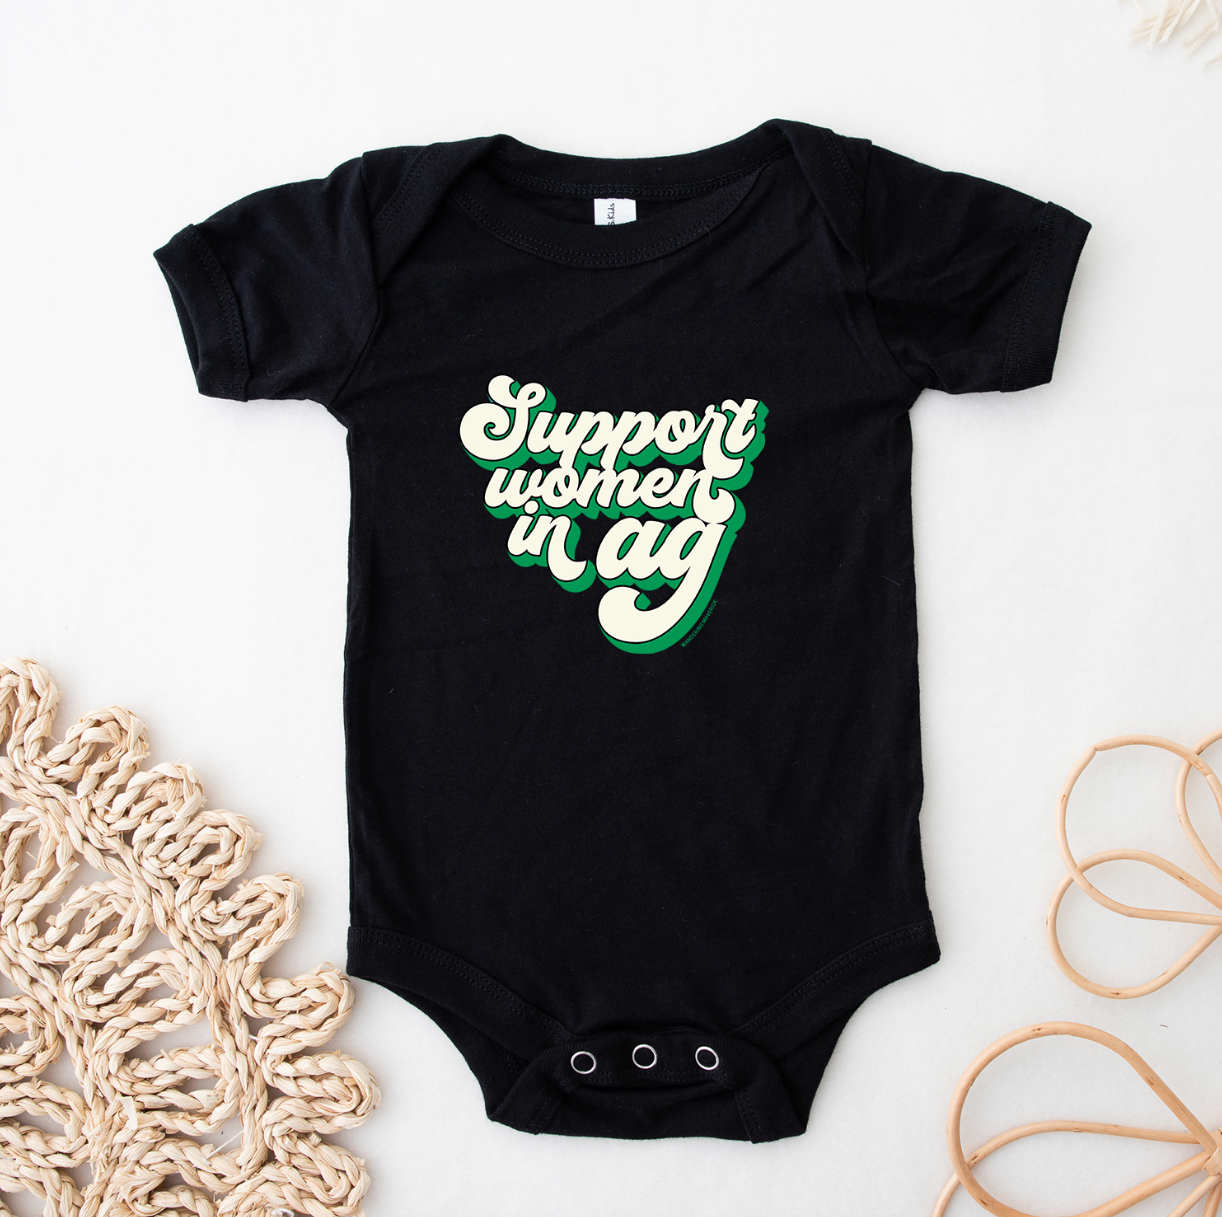 Retro Support Women In Ag Green One Piece/T-Shirt (Newborn - Youth XL) - Multiple Colors!